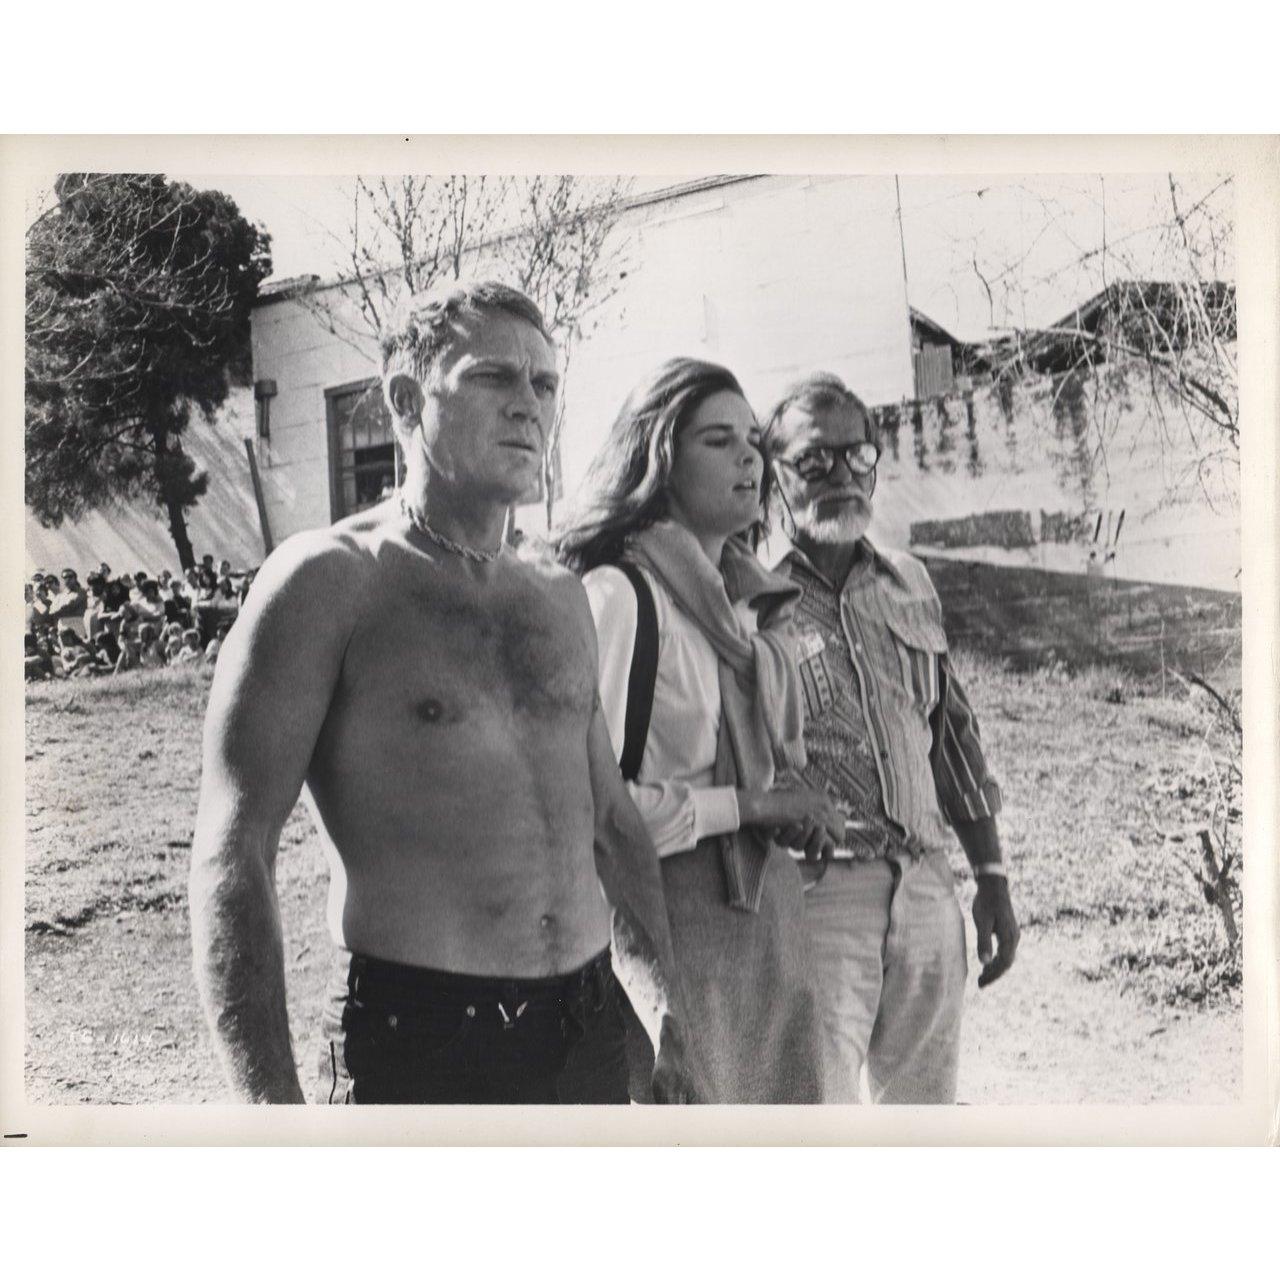 Original 1972 U.S. silver gelatin single-weight photo for the film The Getaway directed by Sam Peckinpah with Steve McQueen / Ali MacGraw / Ben Johnson / Sally Struthers. Fine condition. Please note: the size is stated in inches and the actual size